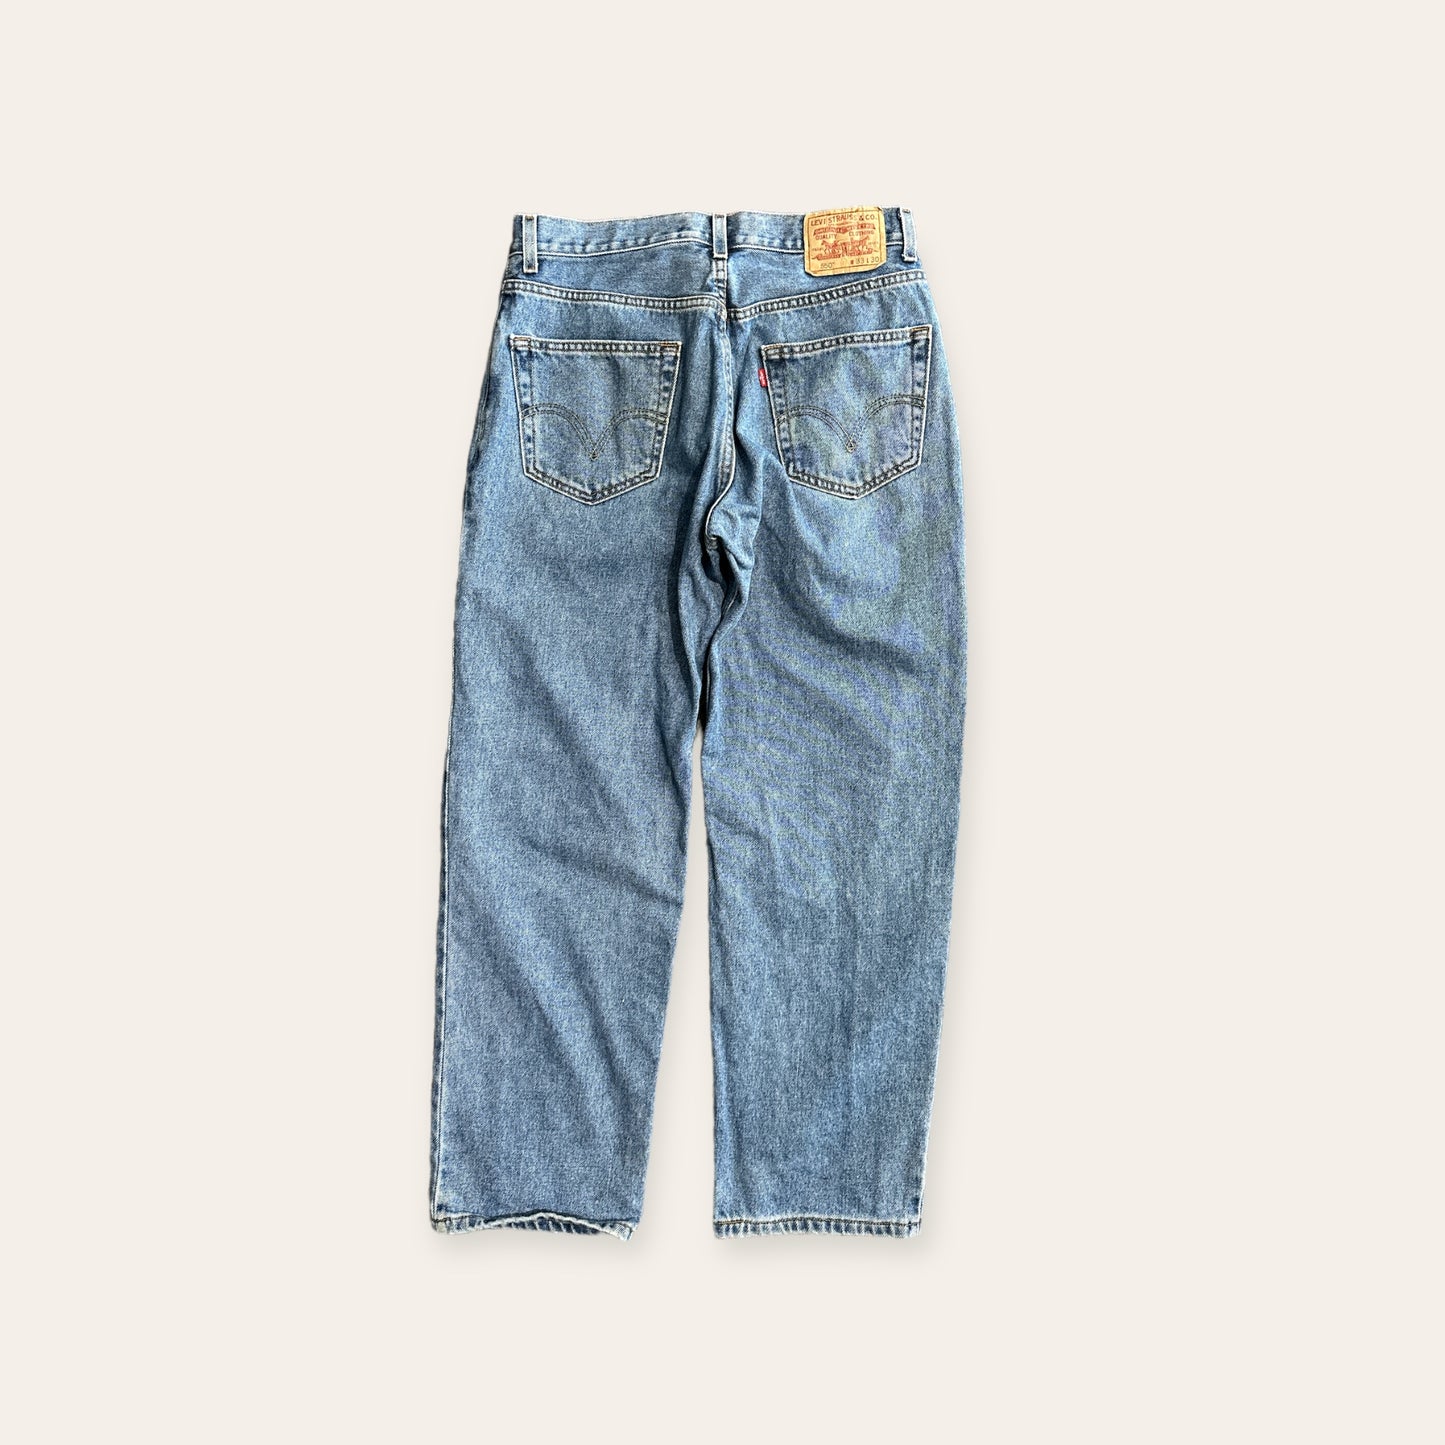 Levis 550 Relaxed Jeans Size 33x30